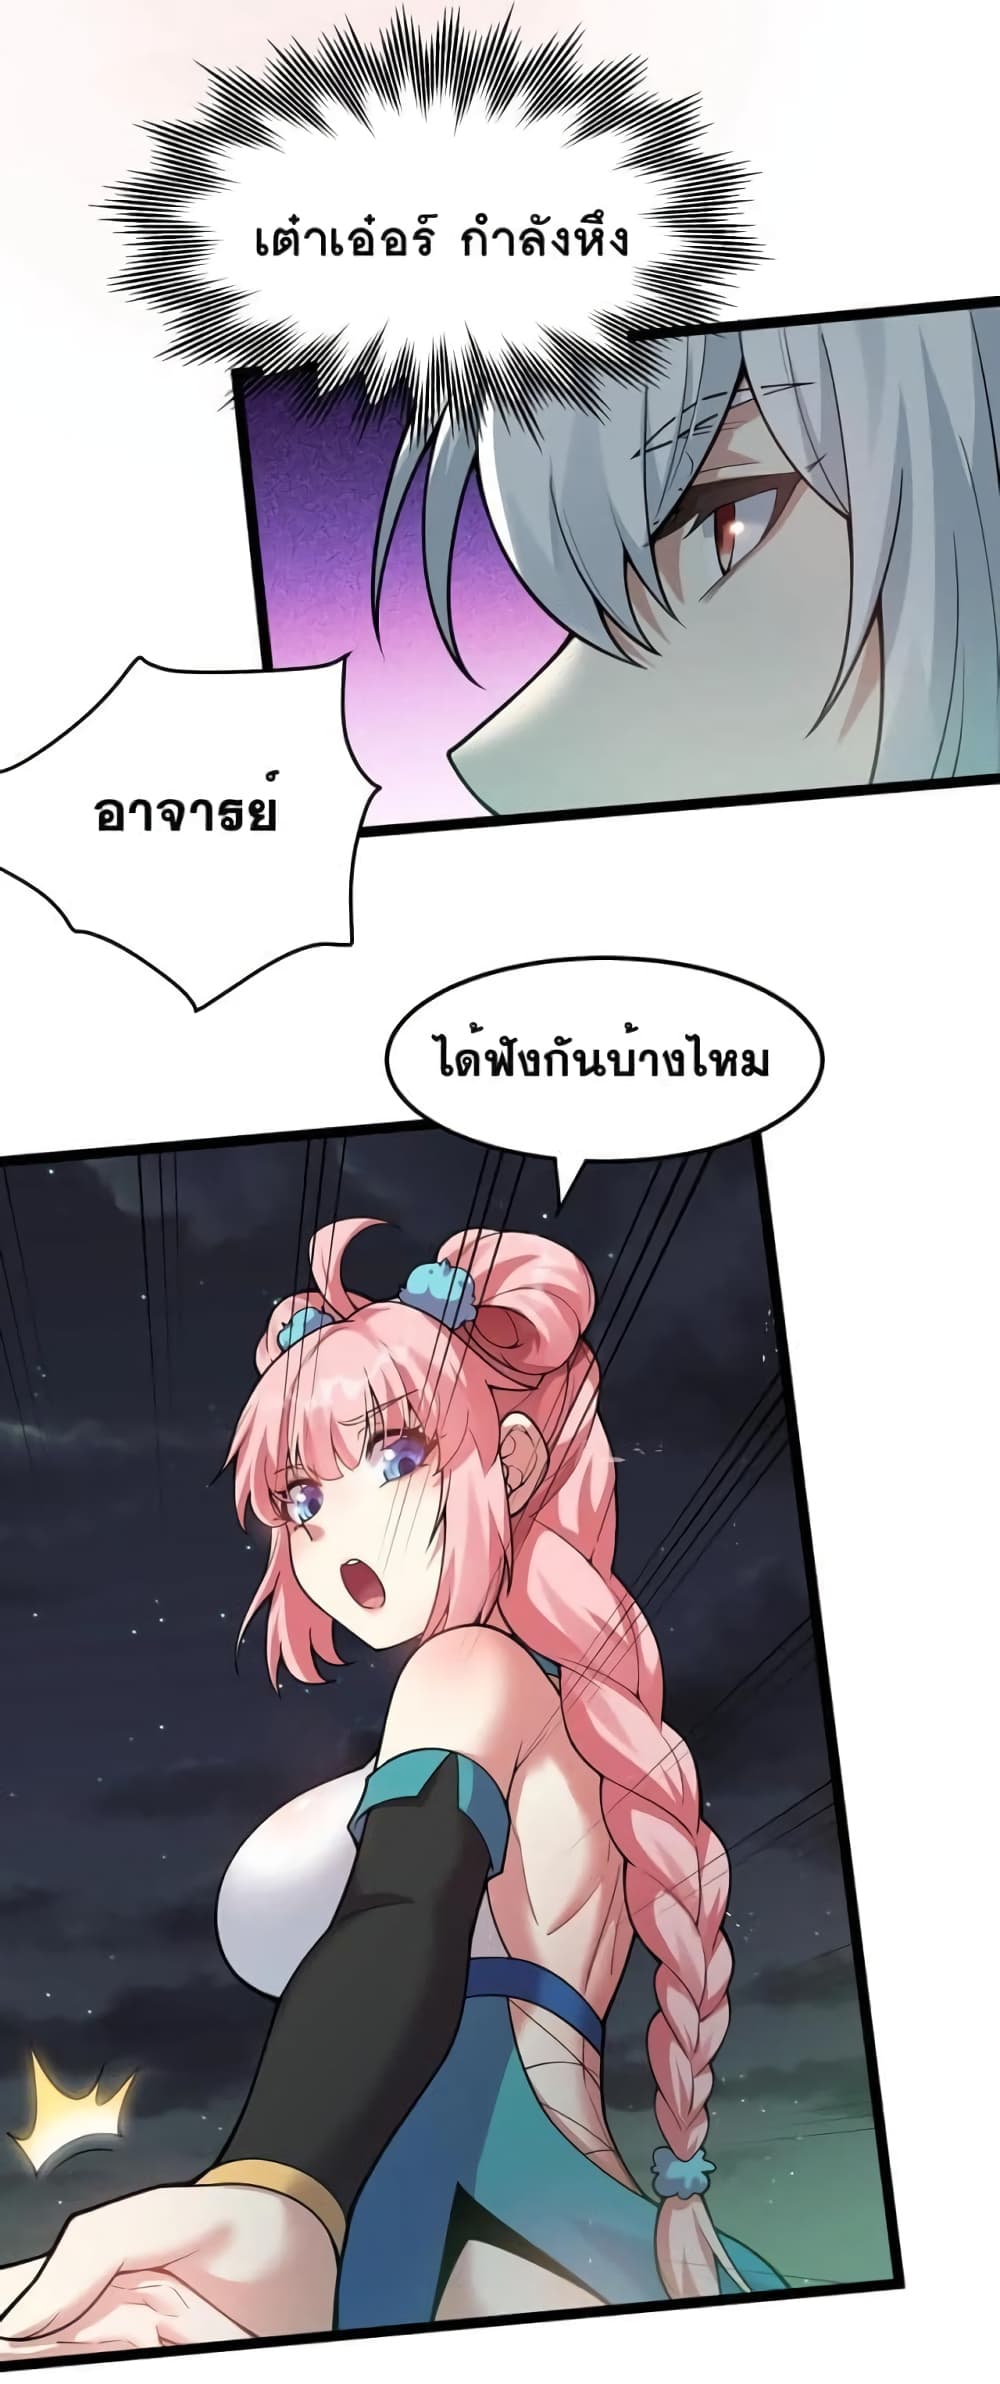 Godsian Masian from Another World ตอนที่ 106 (2)